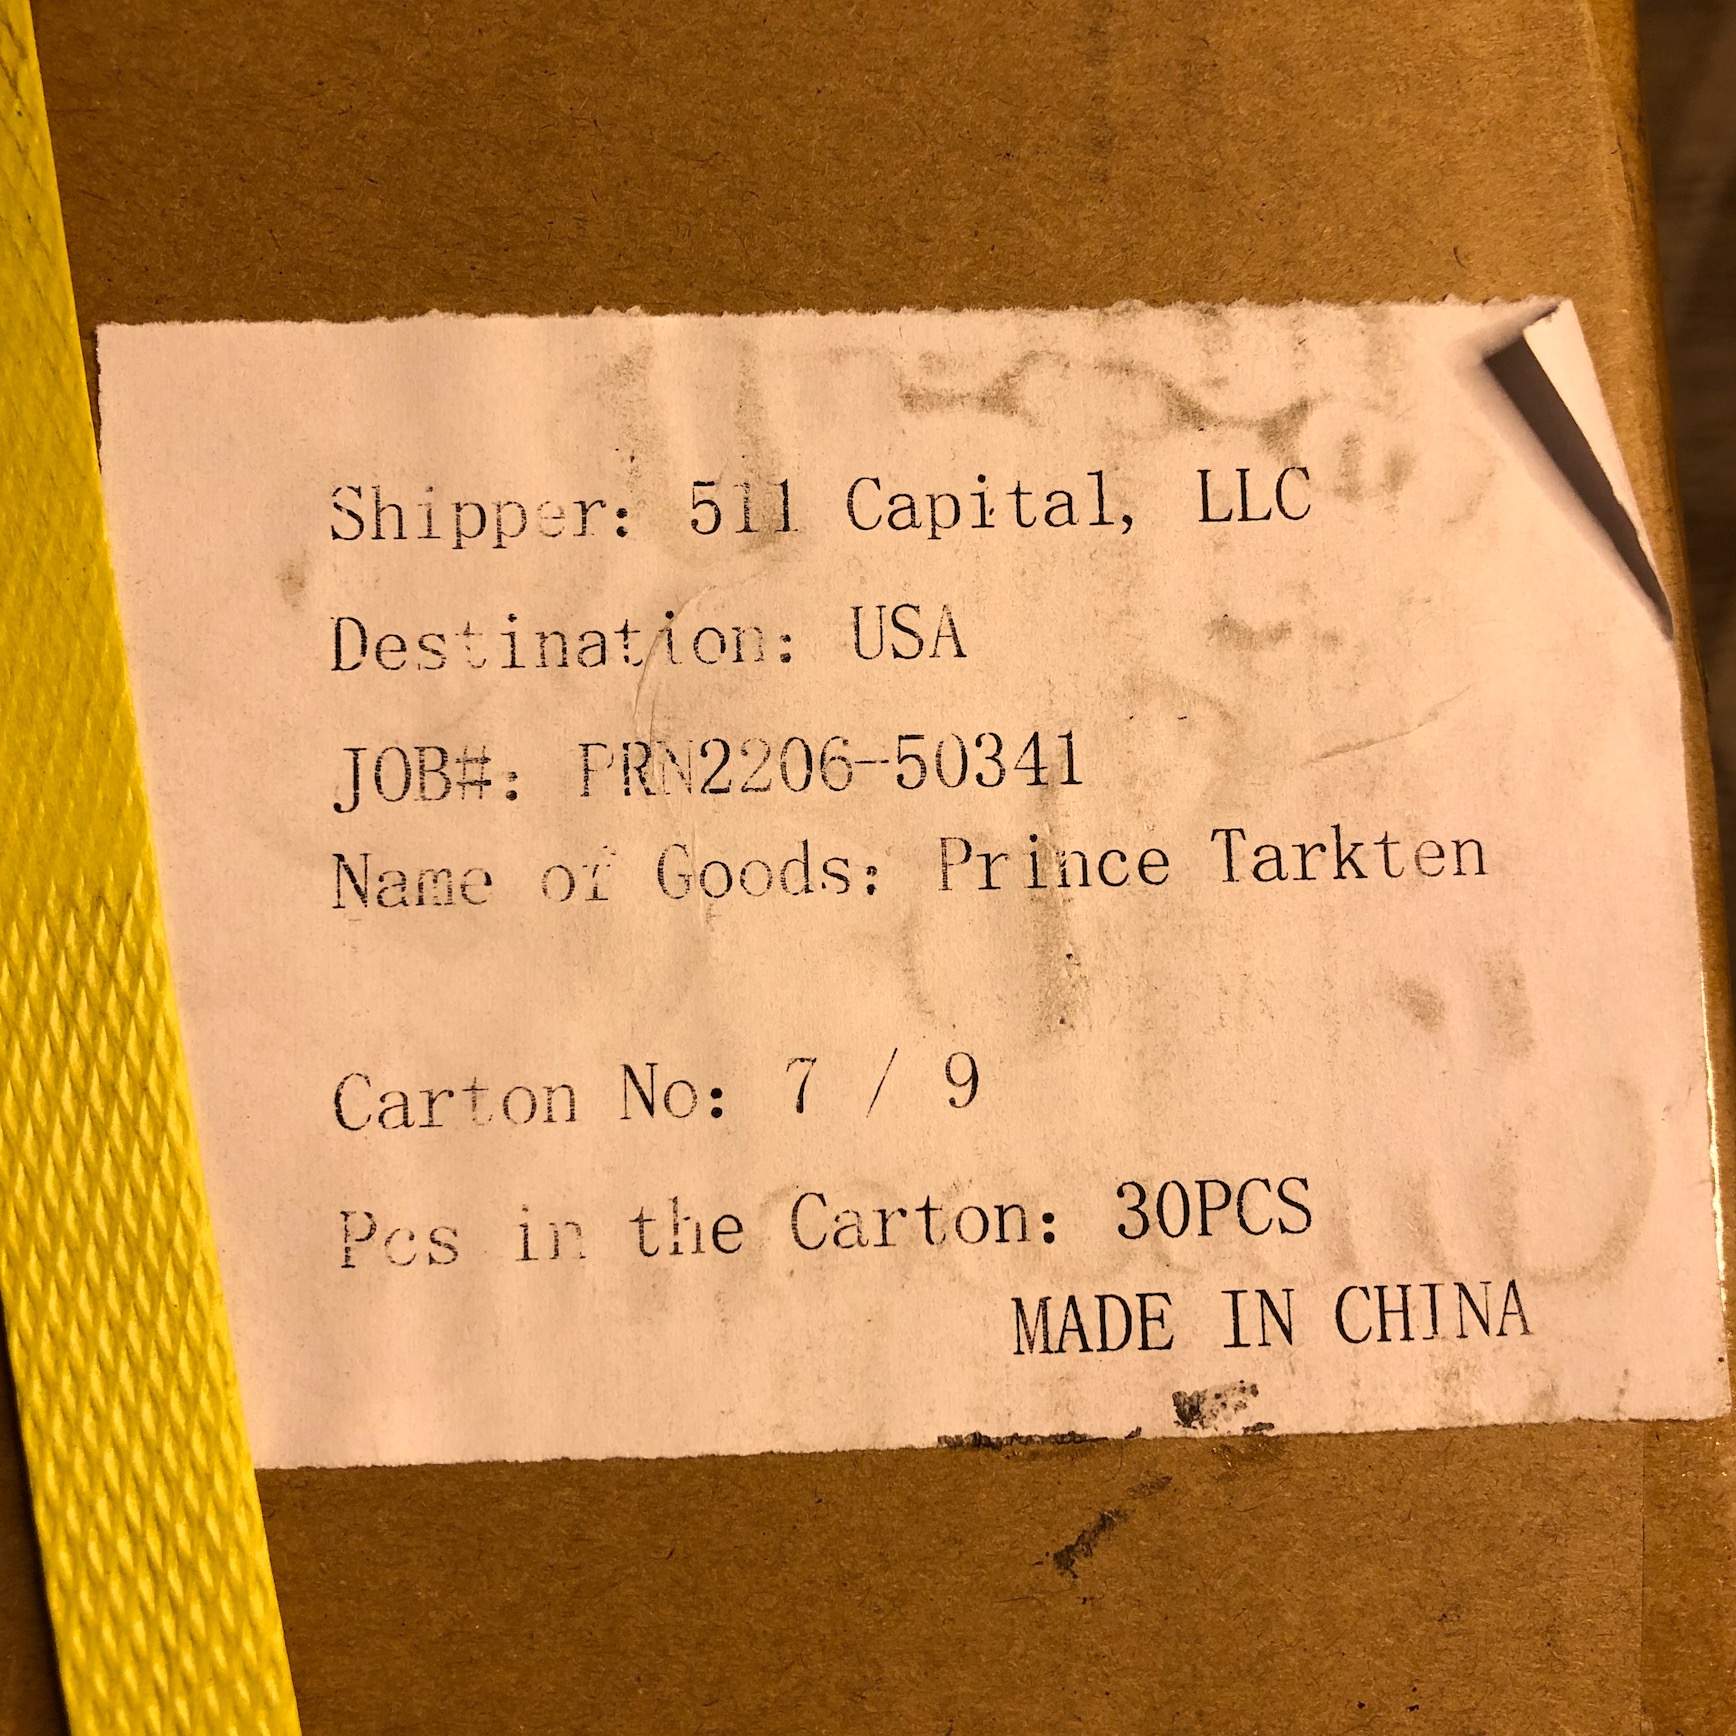 Box label showing Prince Tarkten, shipped from China